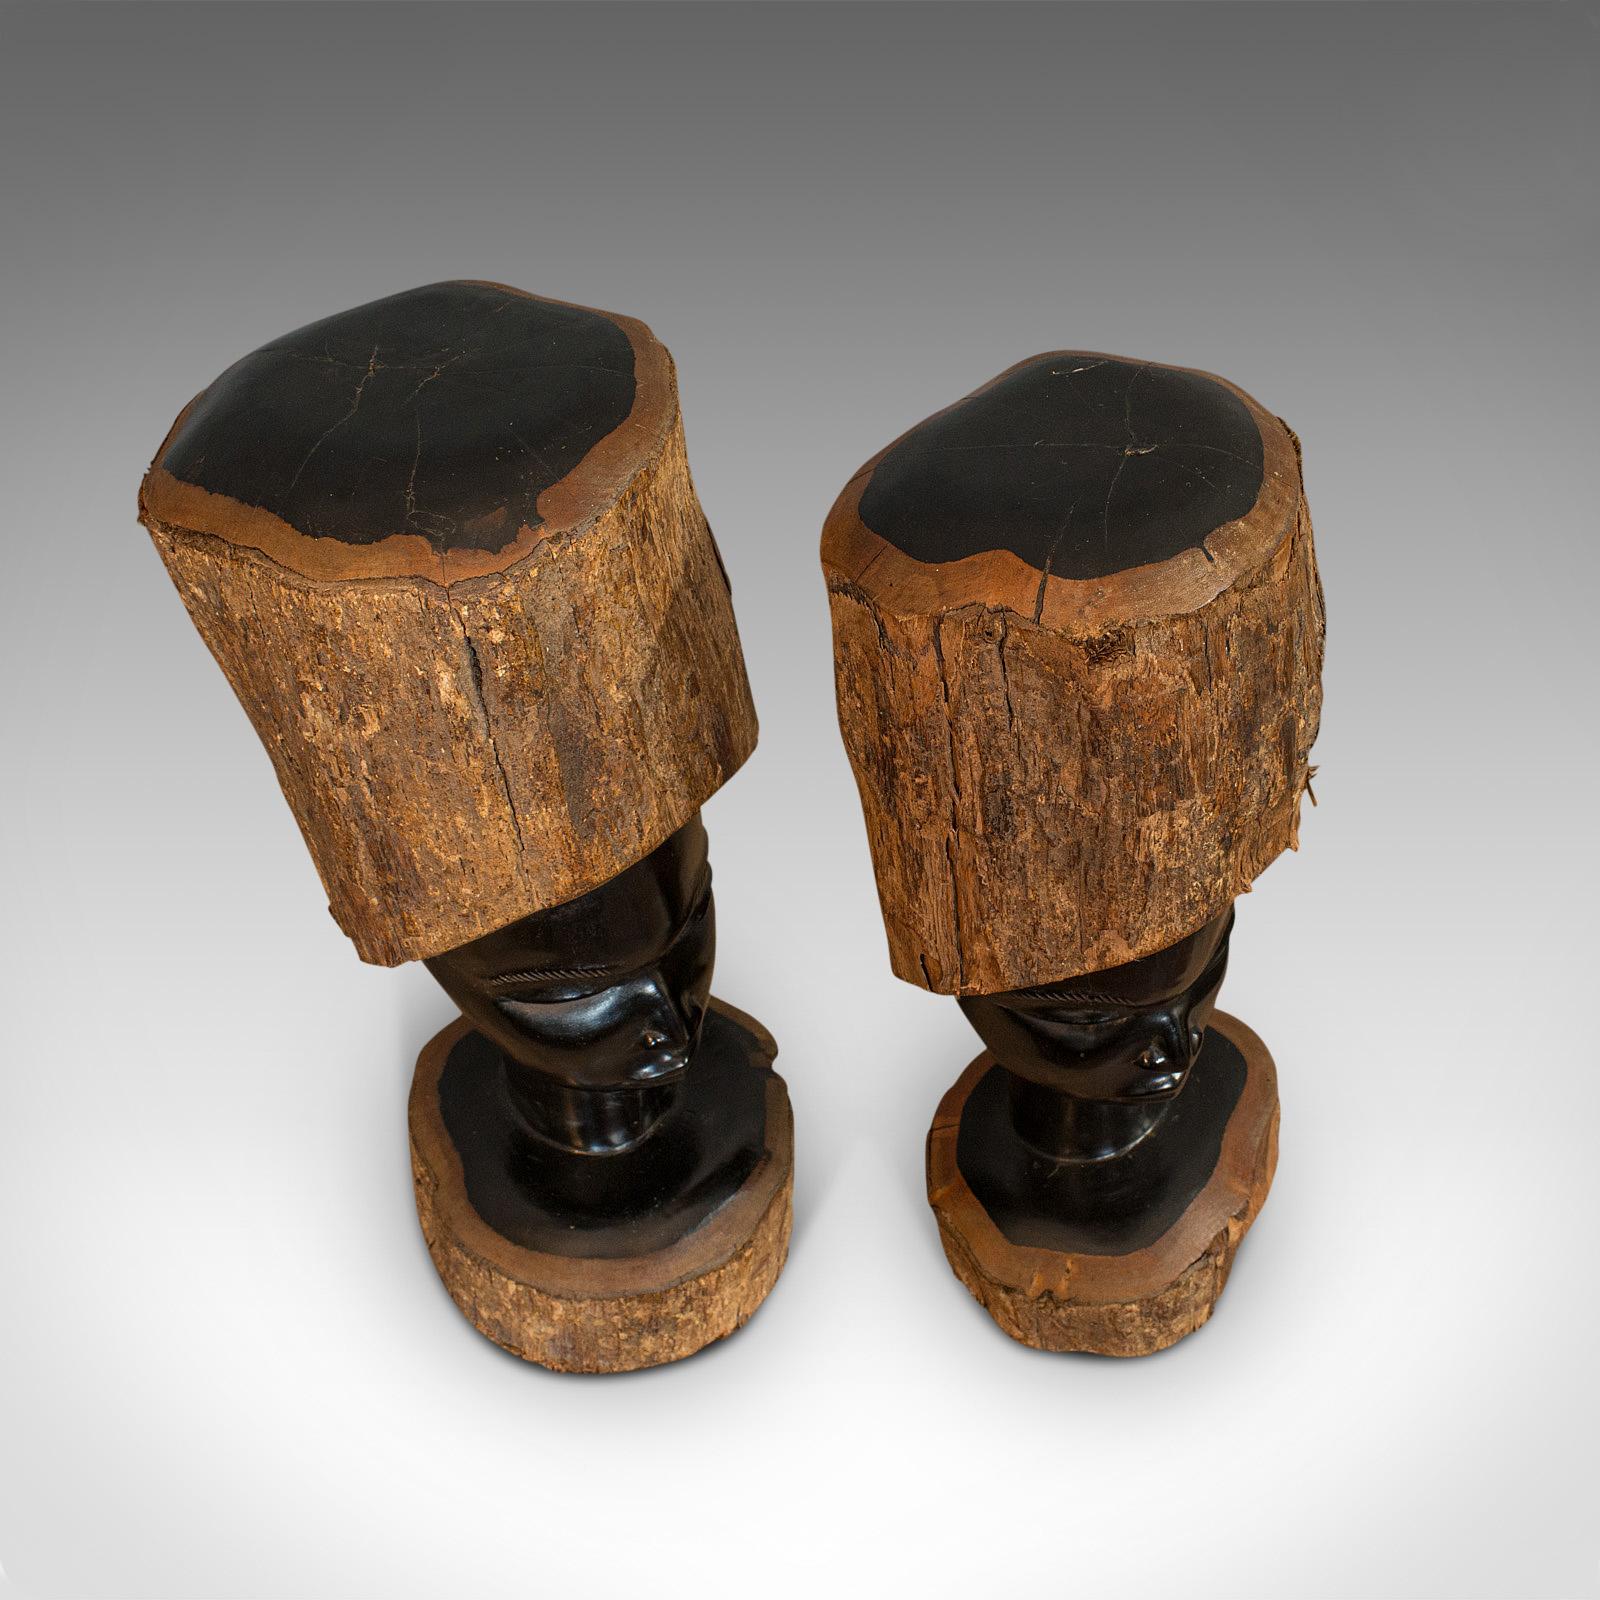 Hand-Carved Pair of Antique Carved Heads, African, Ebony, Decorative Statue, Victorian